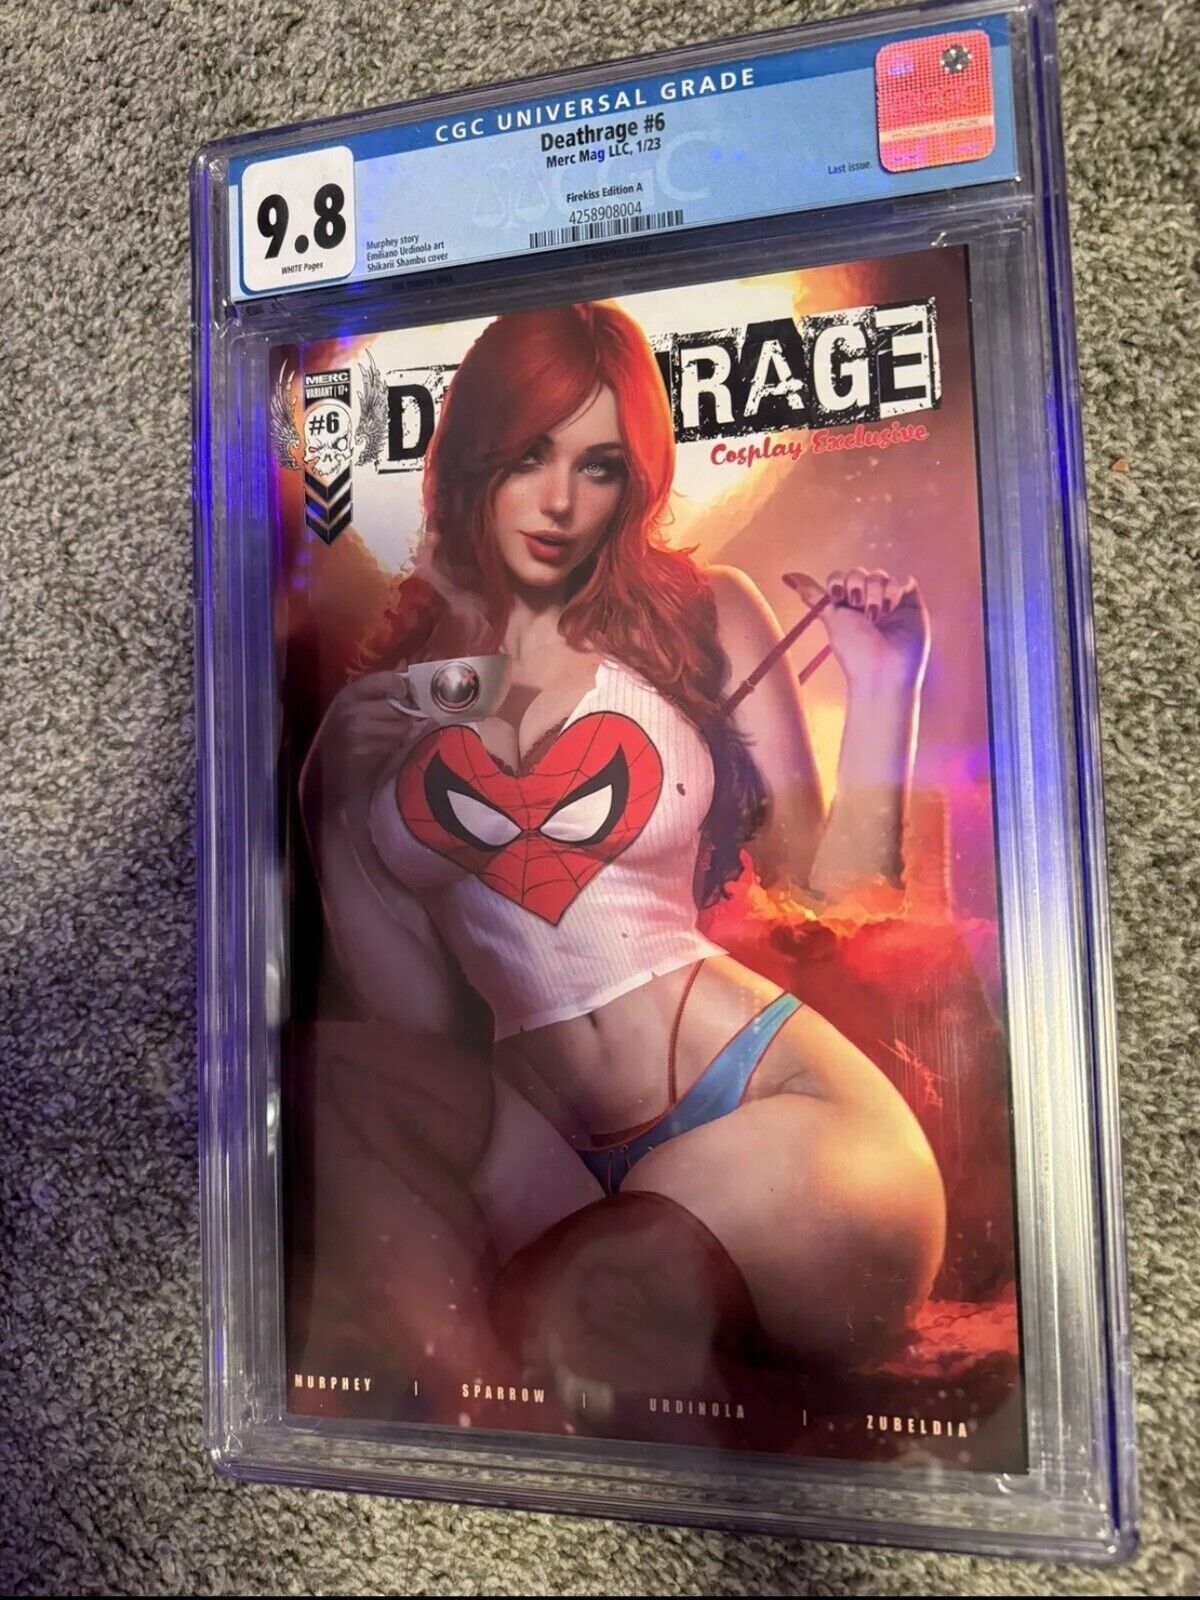 Deathrage #6 “Spider-Man Mary Jane” Cosplay Shikarii CGC 9.8 Limited To 600